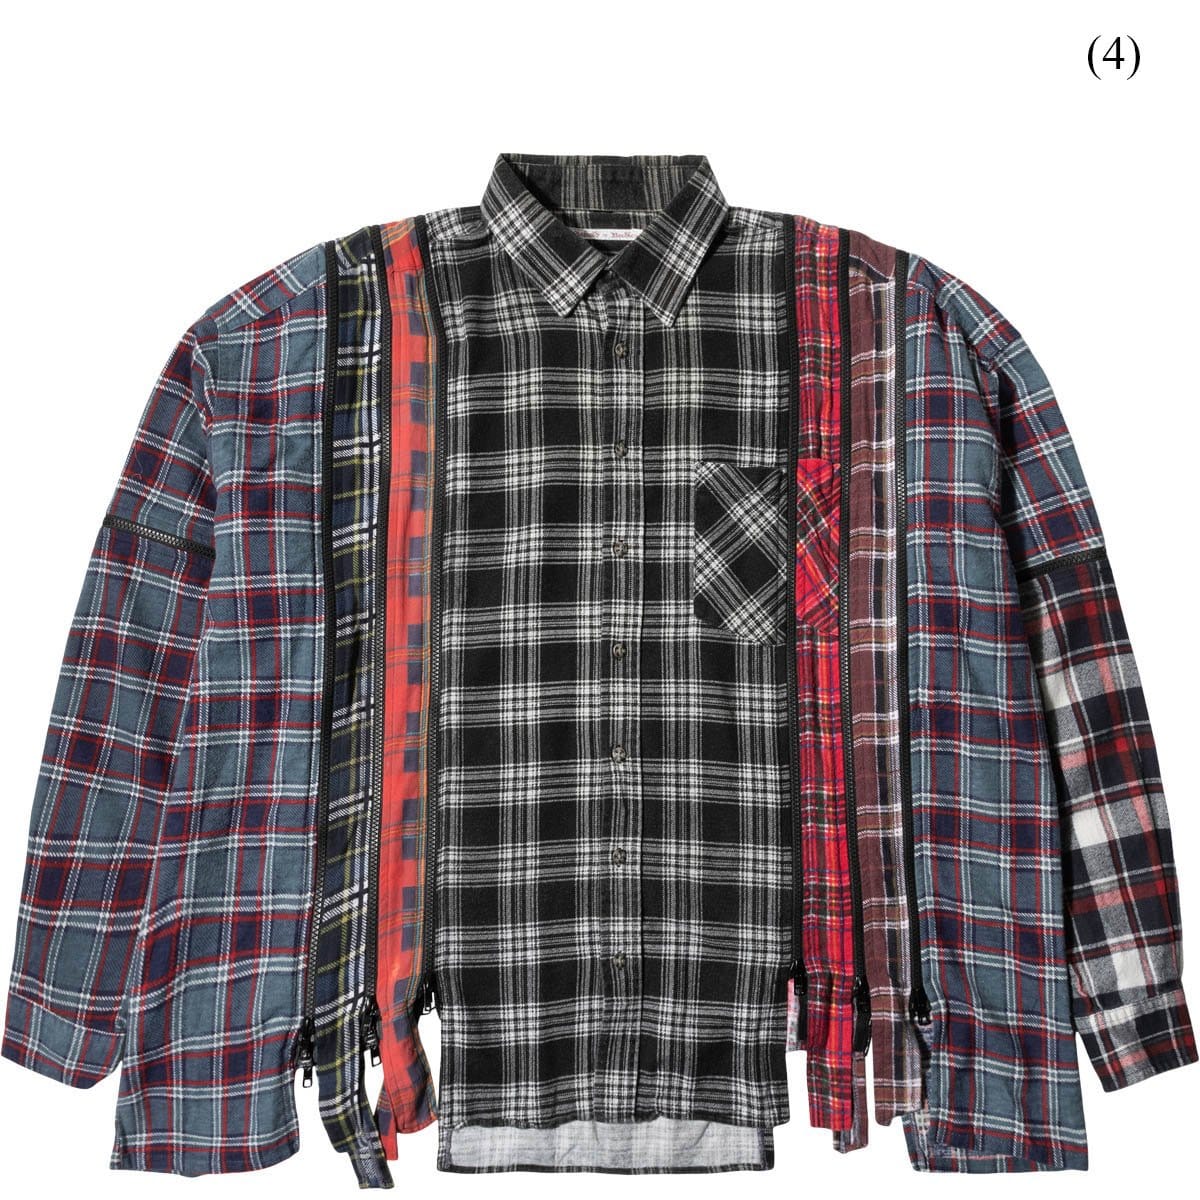 Needles 7 CUTS ZIPPED WIDE FLANNEL SHIRT FW21 (MULTIPLE OPTIONS)